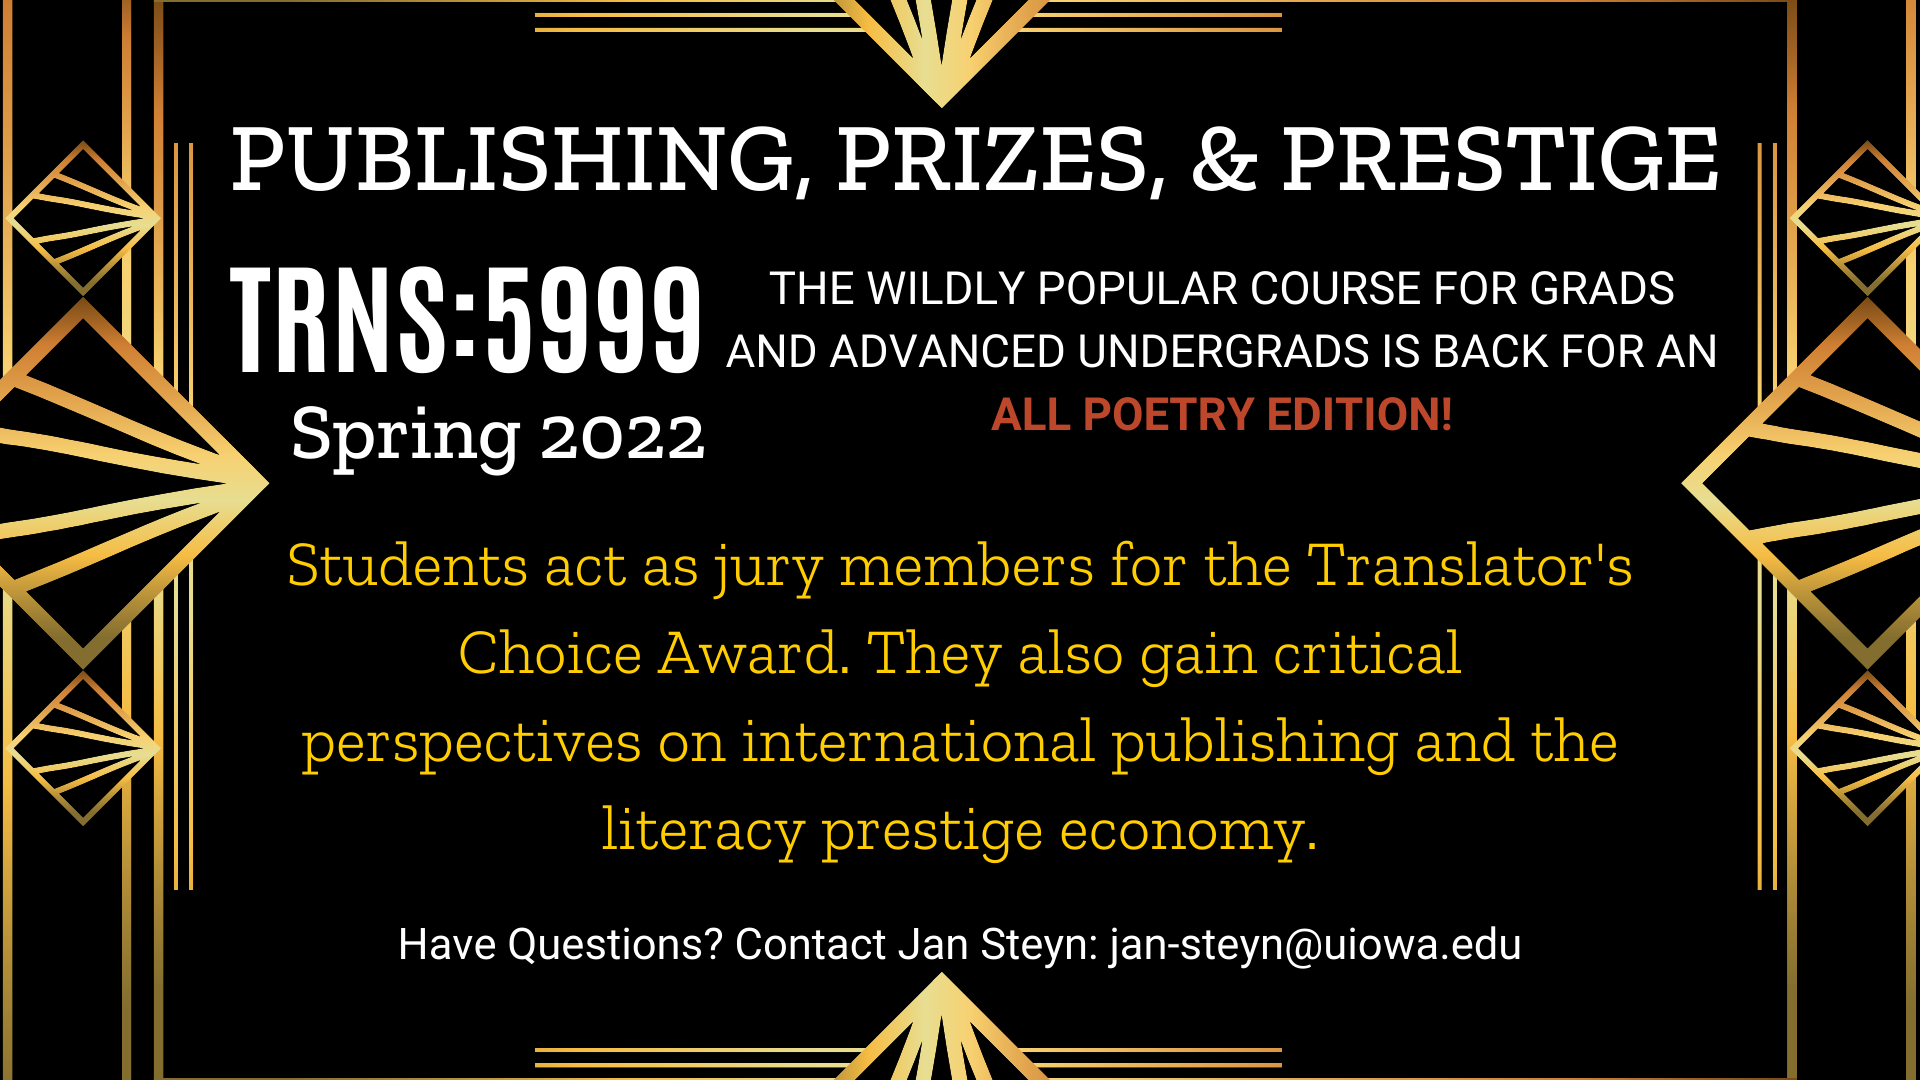 Publishing, Prizes, & Prestige TRNS 5999 coming this Spring 2022. The wildly popular course for Grads and advanced Undergrads is BACK for an all poetry edition! Students act as jury members for the Translator's Choice Award. They also gain critical perspectives on international publishing and the literacy prestige economy. Have Questions? Contact Jan Steyn: jan-steyn@uiowa.edu